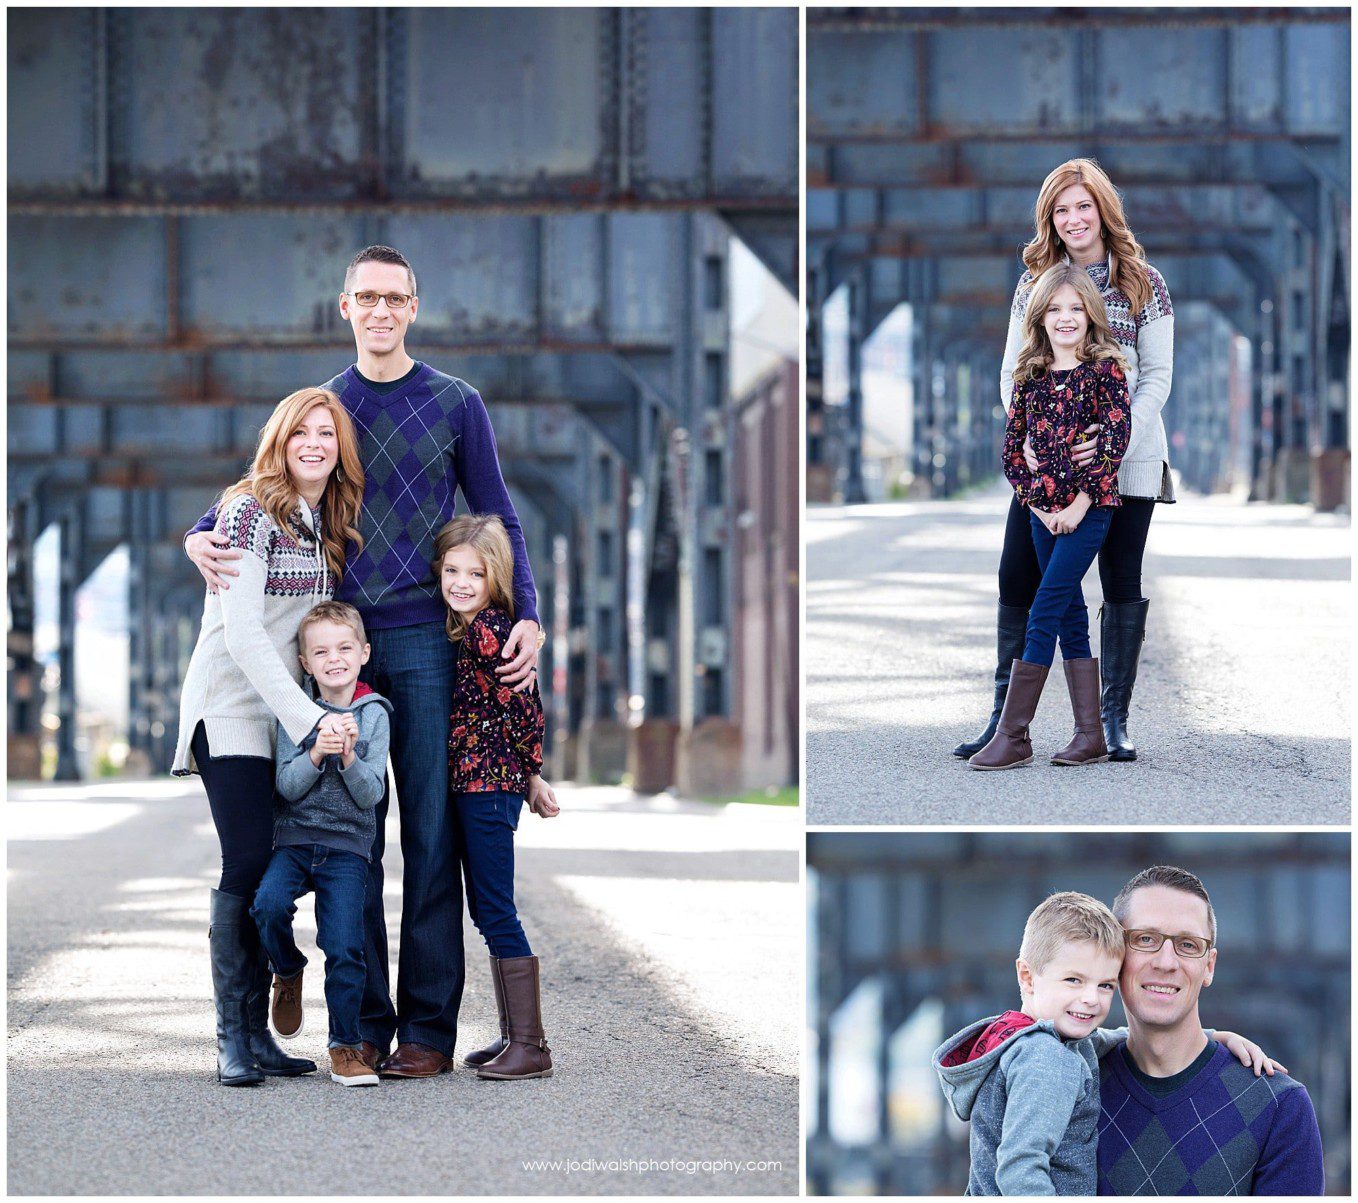 collage of strip district family portraits.  image of mom and dad with young daughter and son, standing in a road underneath the steel beams of a railroad bridge.